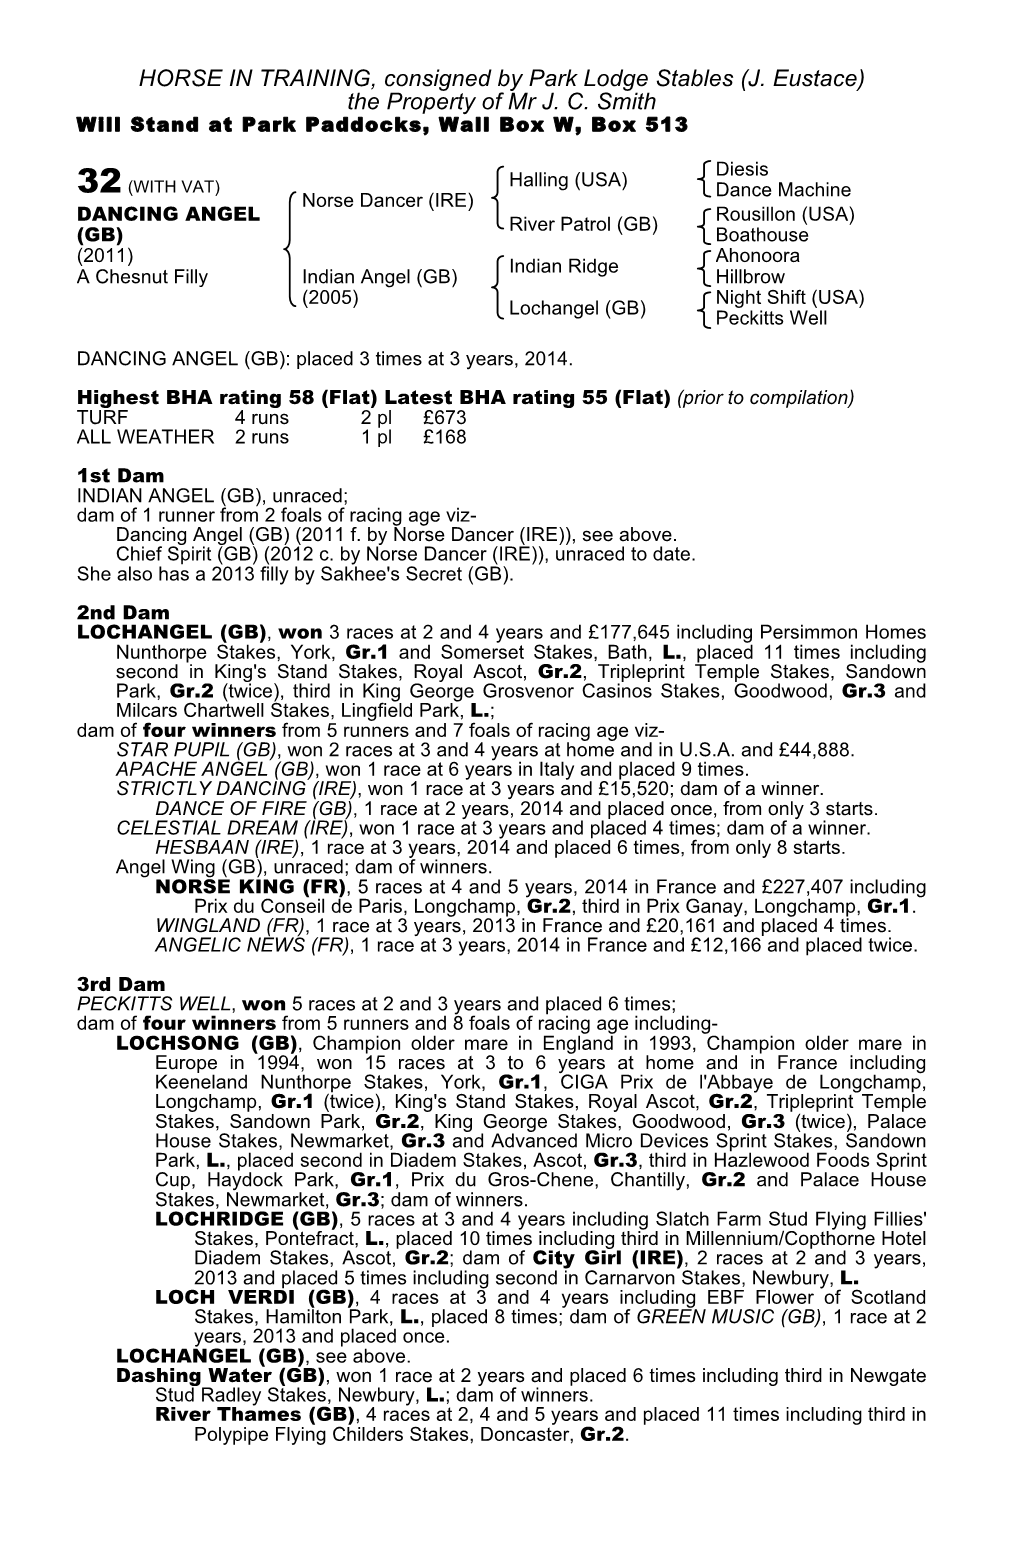 HORSE in TRAINING, Consigned by Park Lodge Stables (J. Eustace) the Property of Mr J. C. Smith Will Stand at Park Paddocks, Wall Box W, Box 513